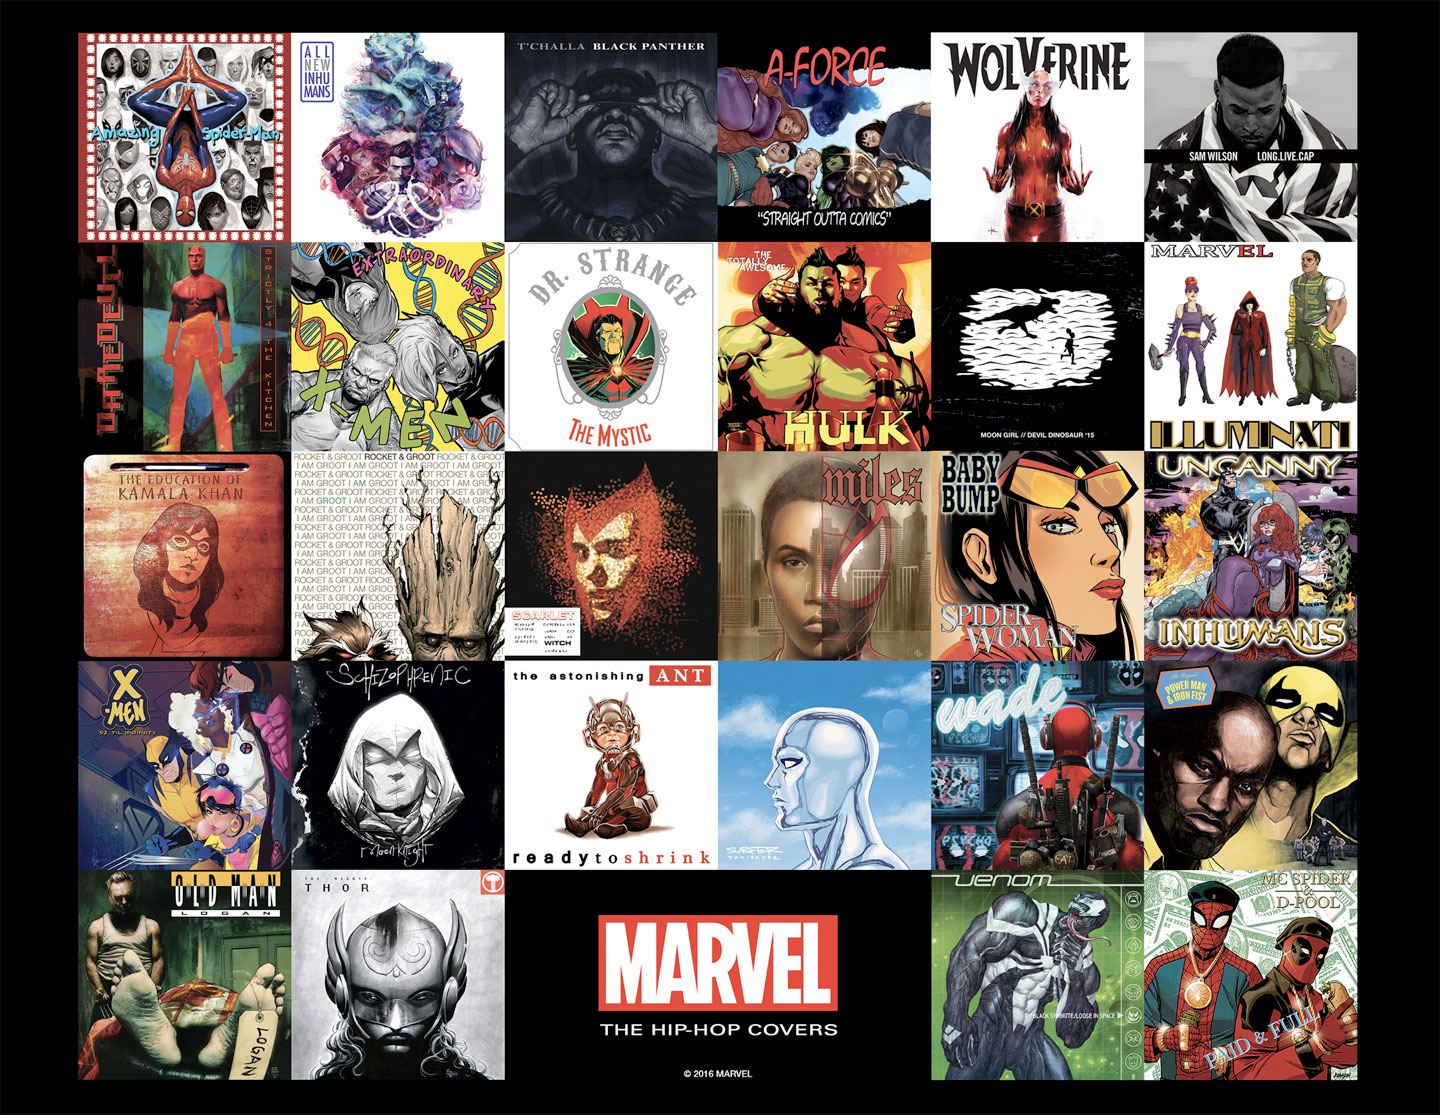 Marvel’s New York City ComicCon Schedule – Artists Signings